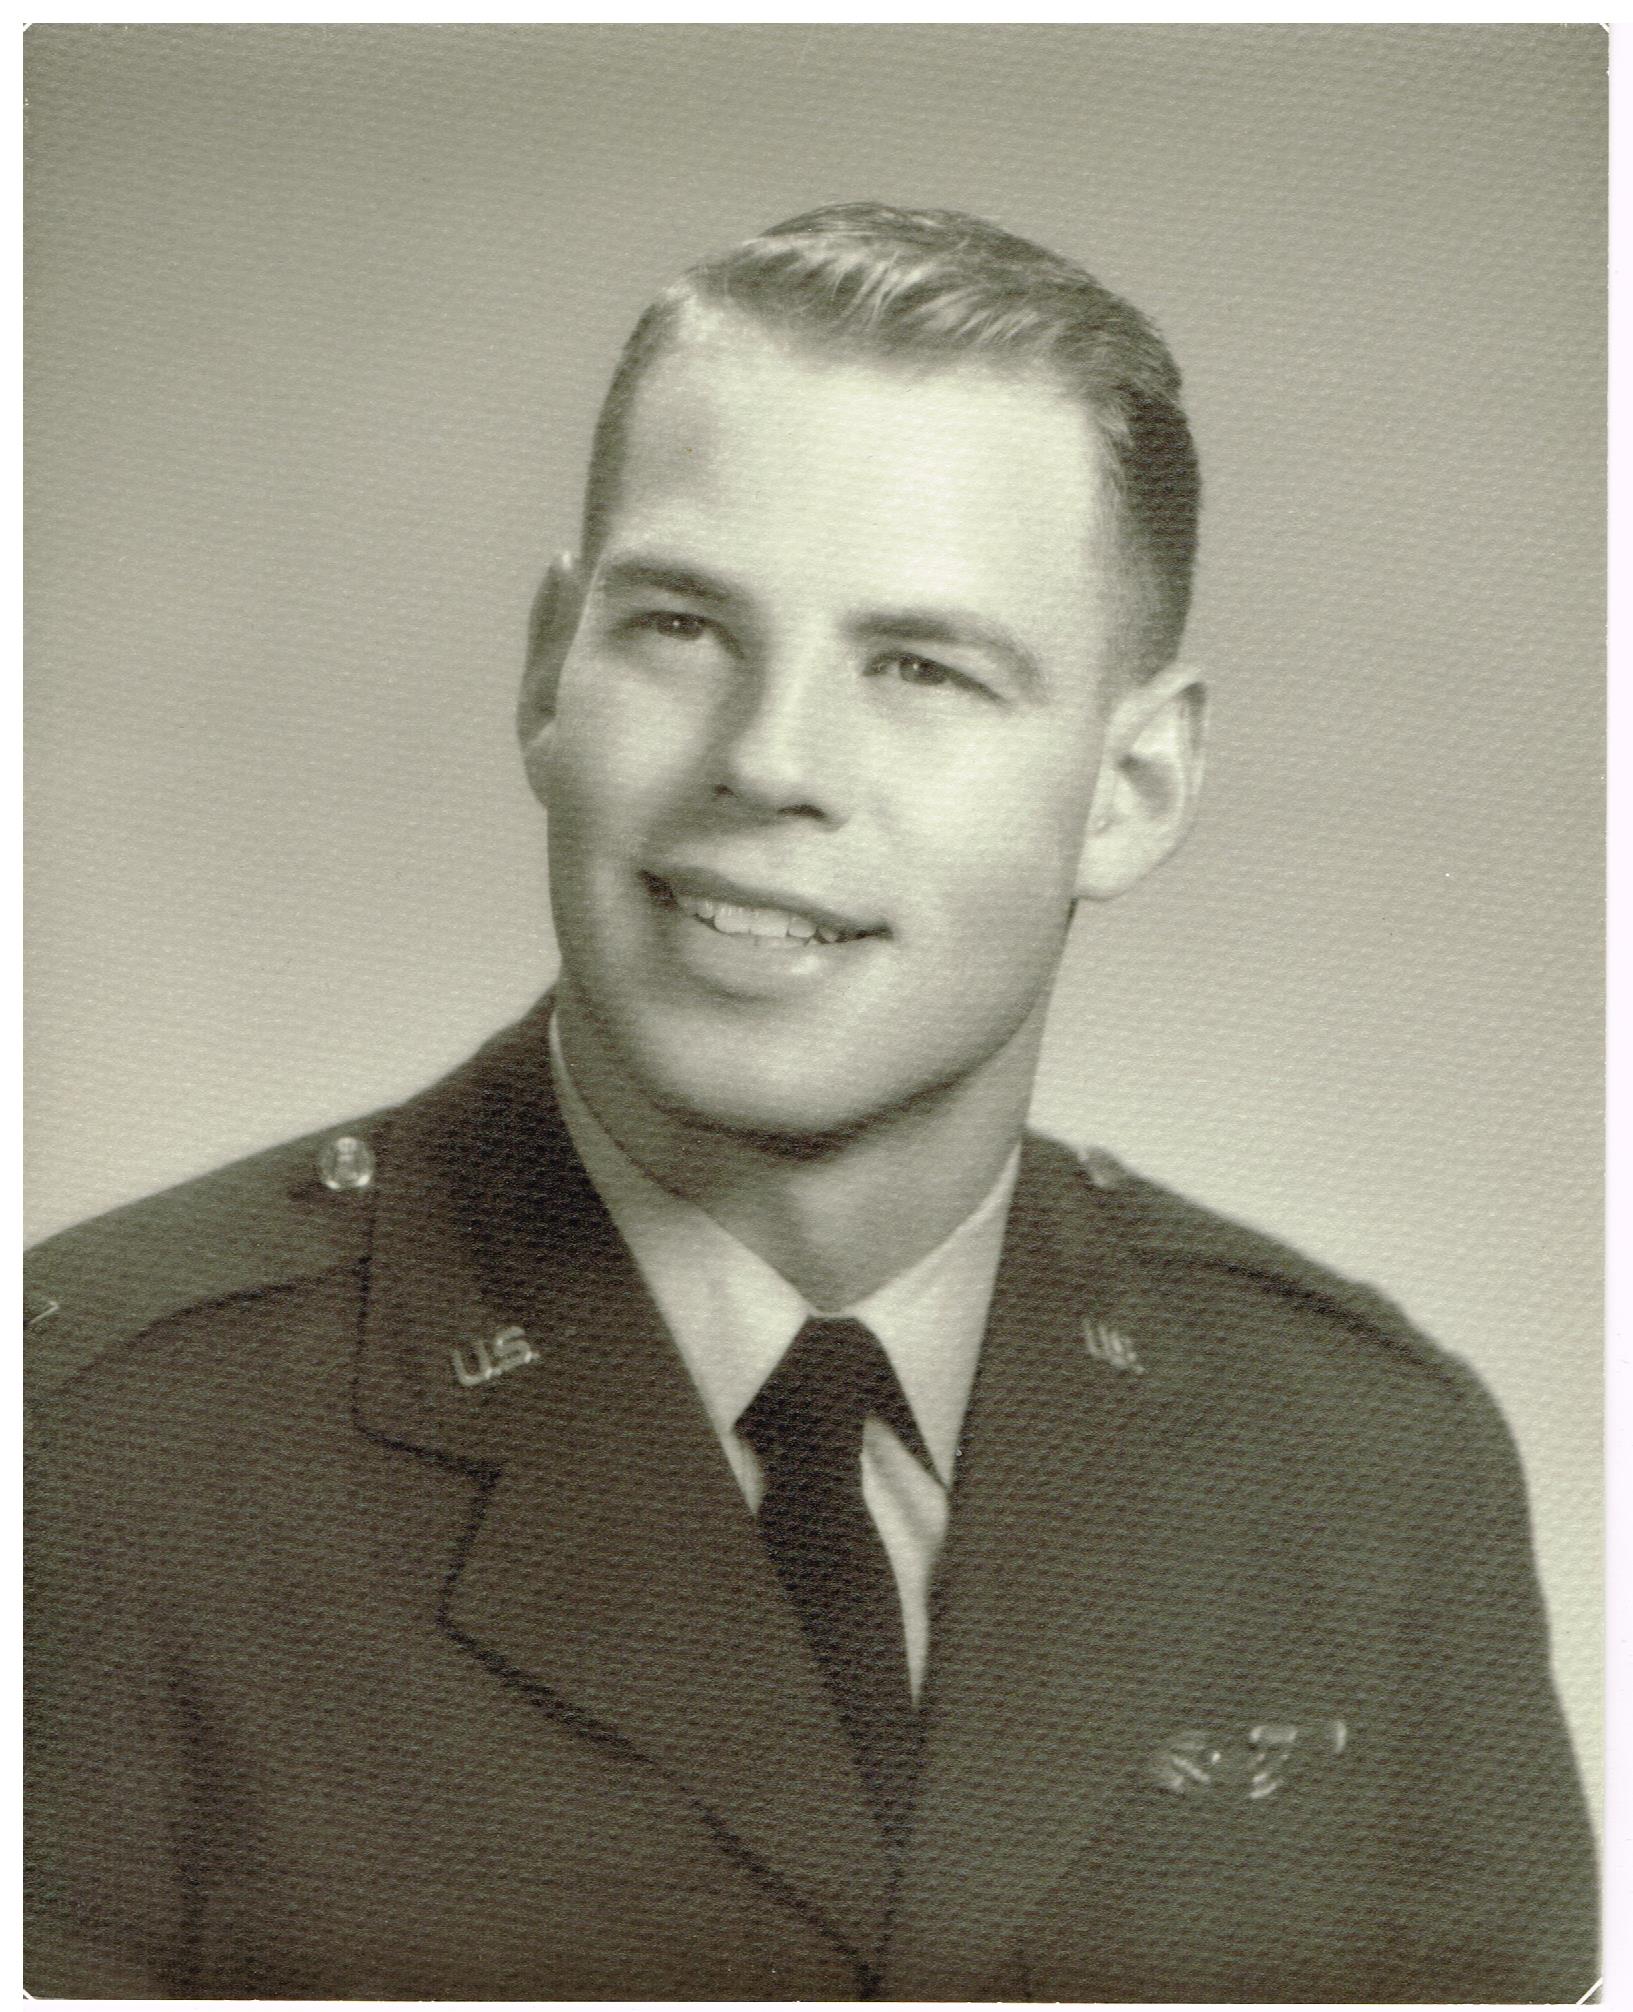 William D. 'Bill' Scott with his Air Force Wings.  December 7, 1962 